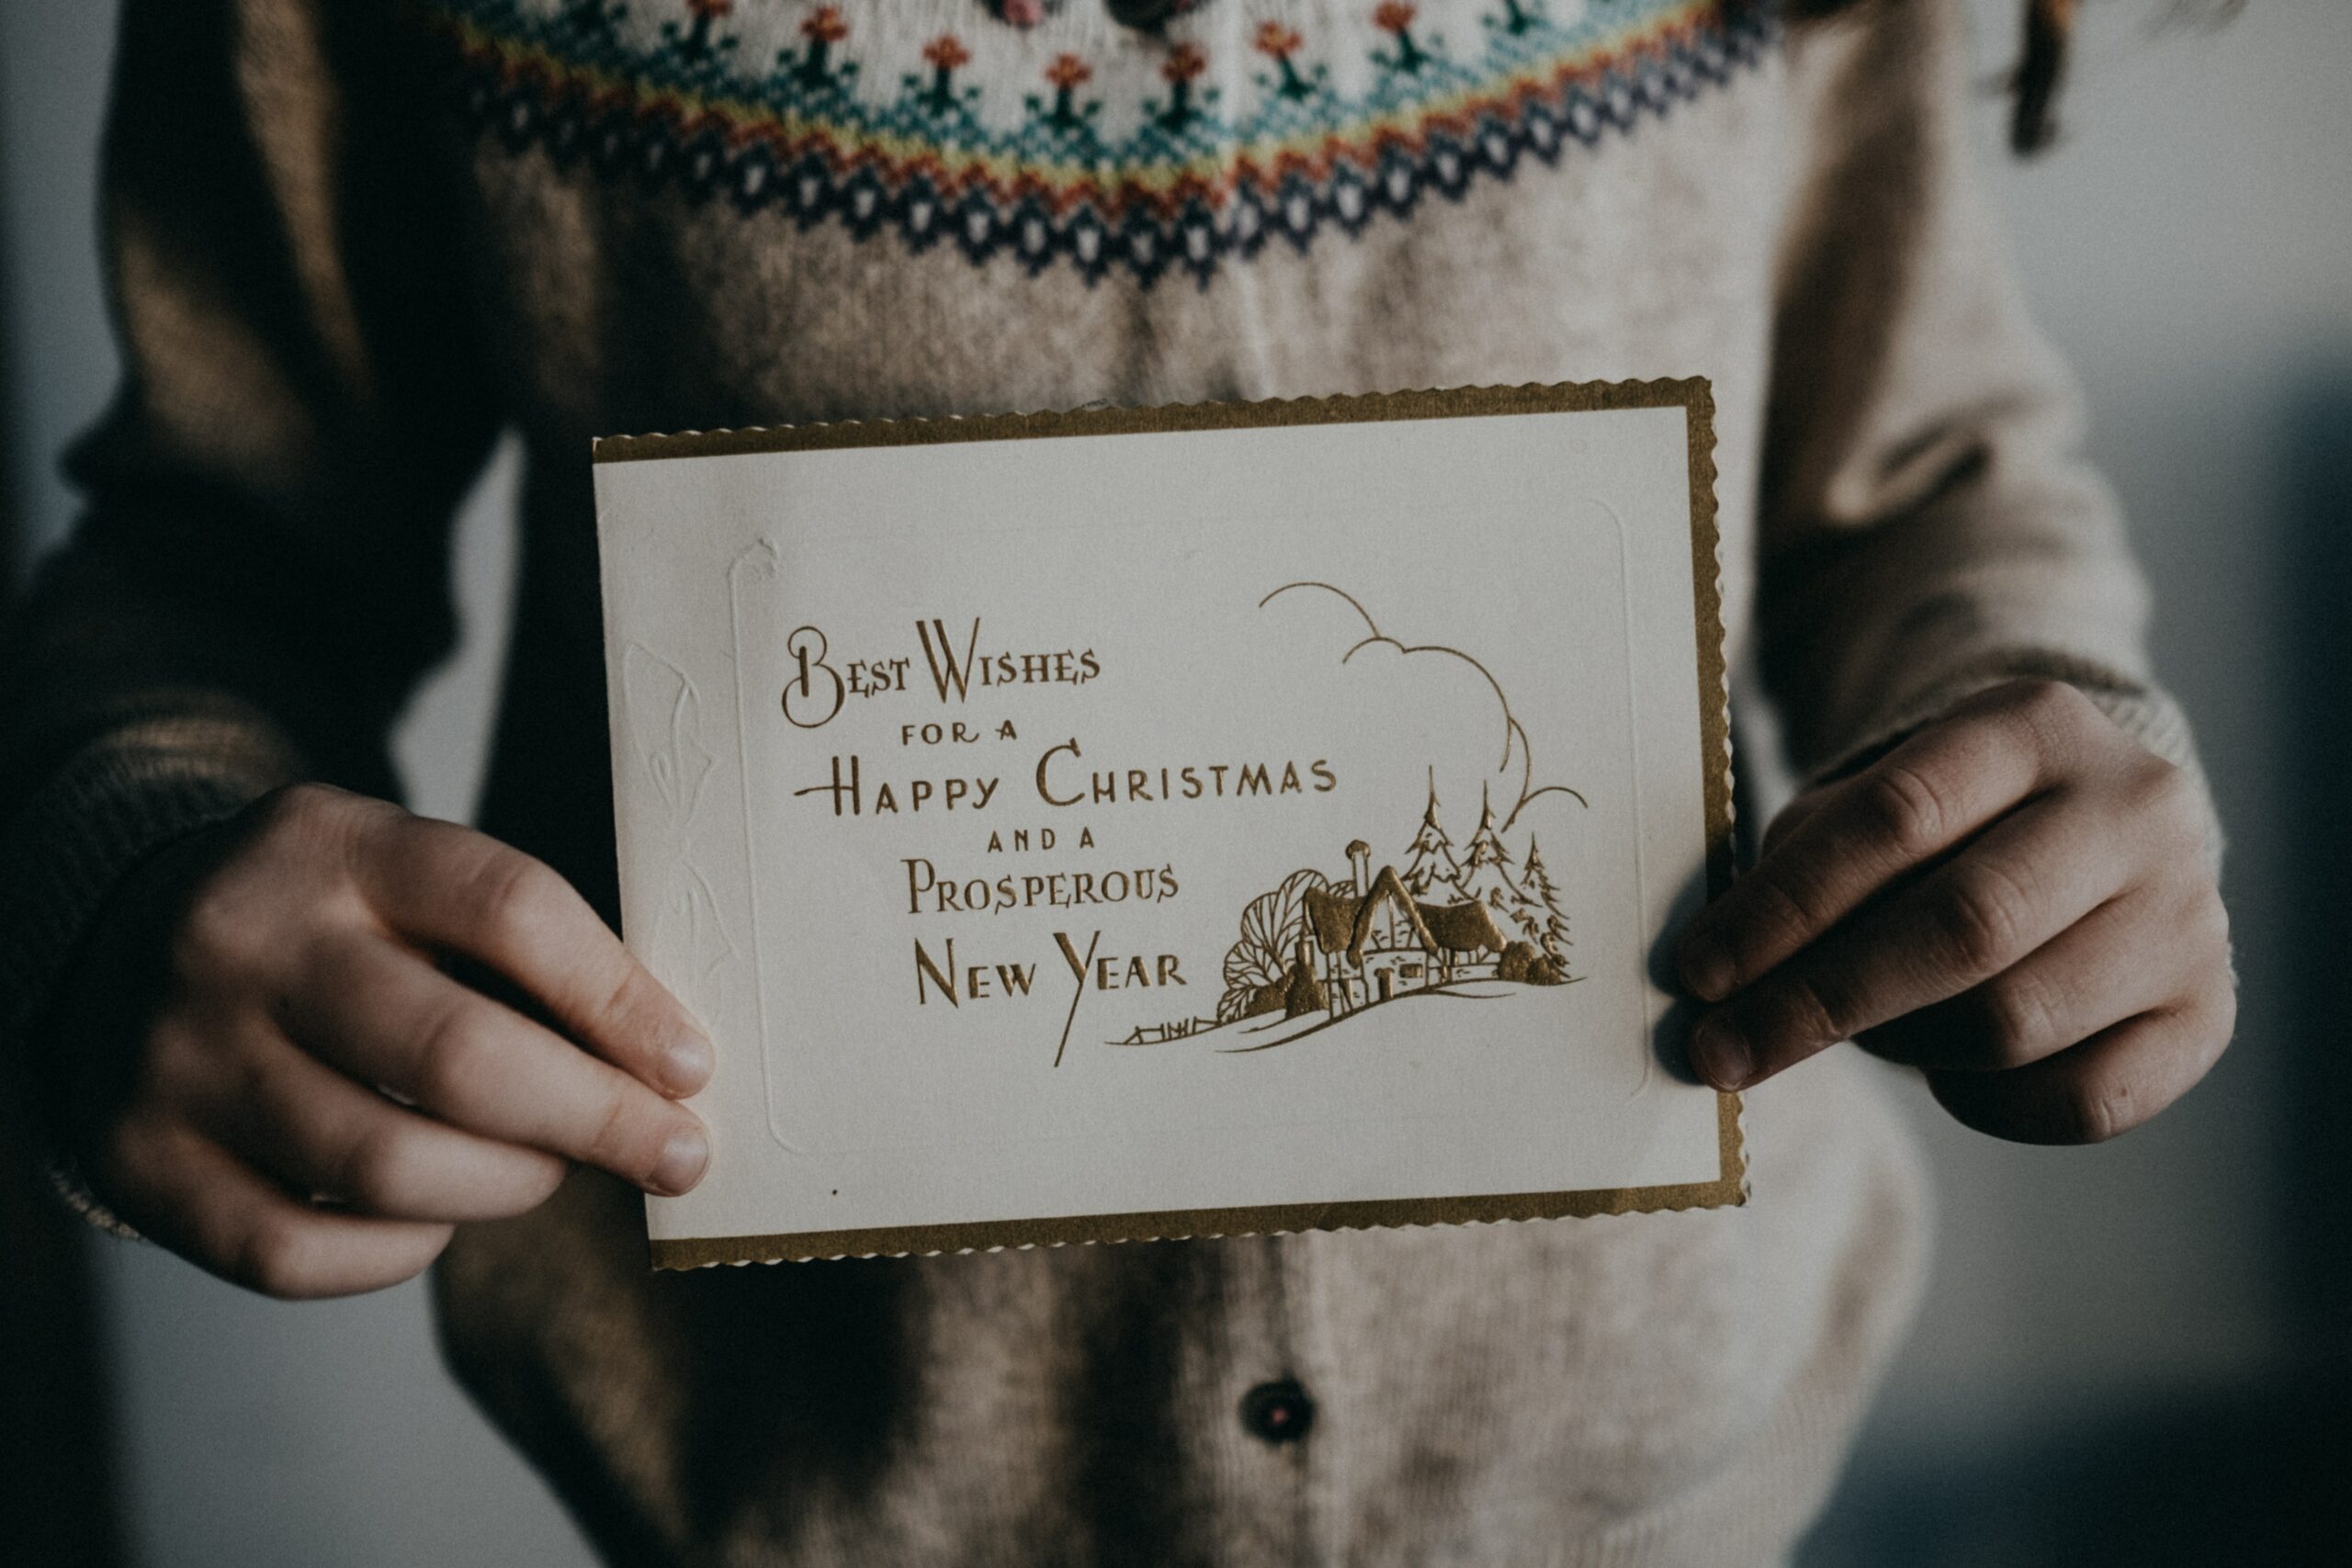 Holiday Cards: Where to Buy Online Christmas cards?